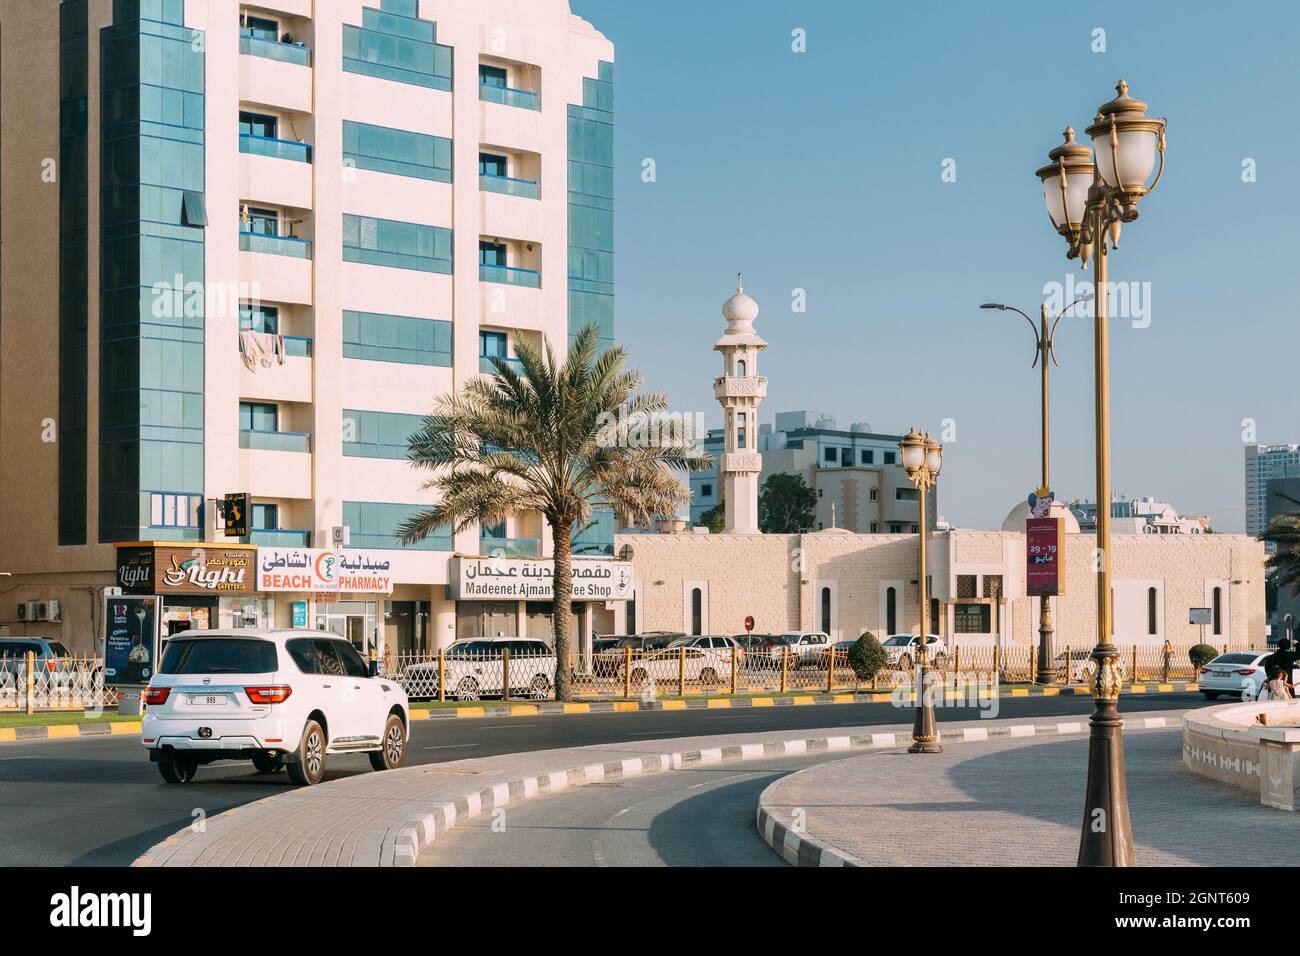 Nissan Patrol Moving In Street Of City Of Ajman Stock Photo